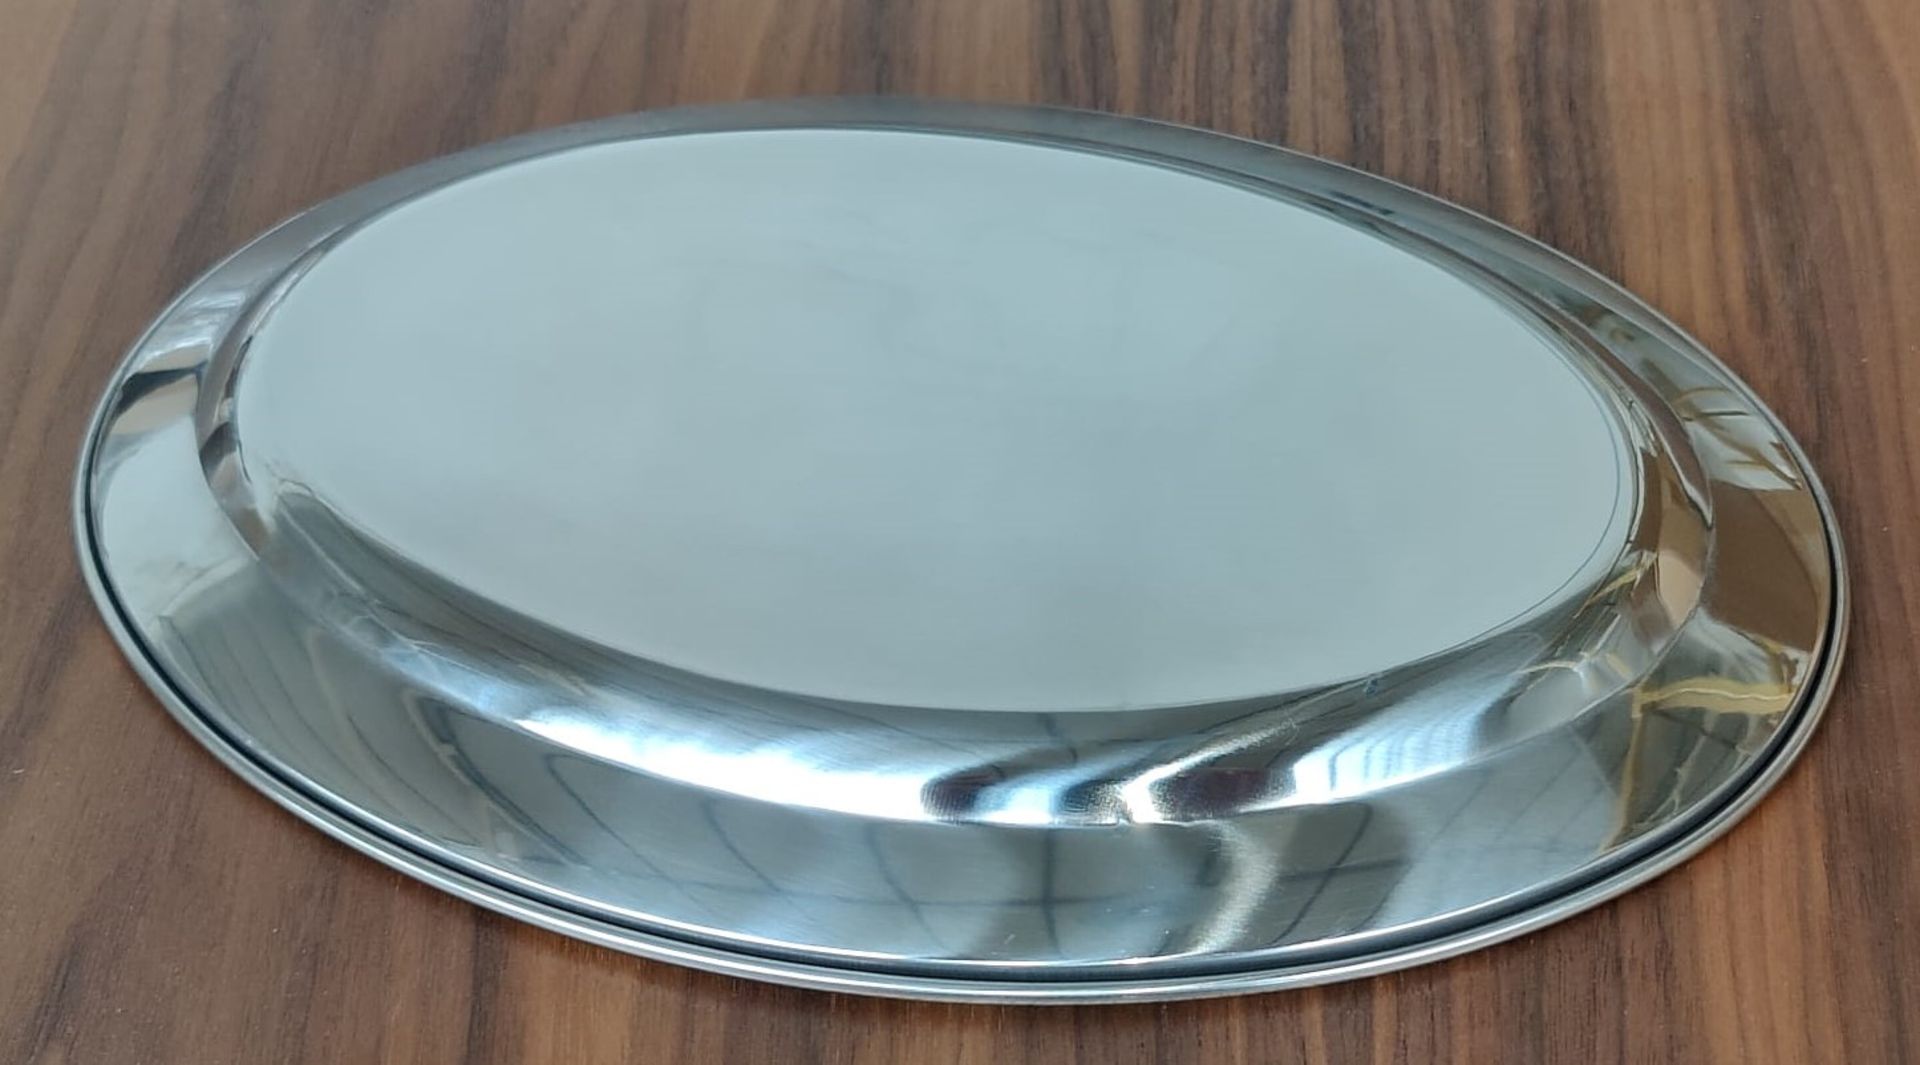 18 x Stainless Steel Small Oval Service Trays - Size: 255mm x 180mm - Brand New Boxed Stock RRP £90 - Image 2 of 7